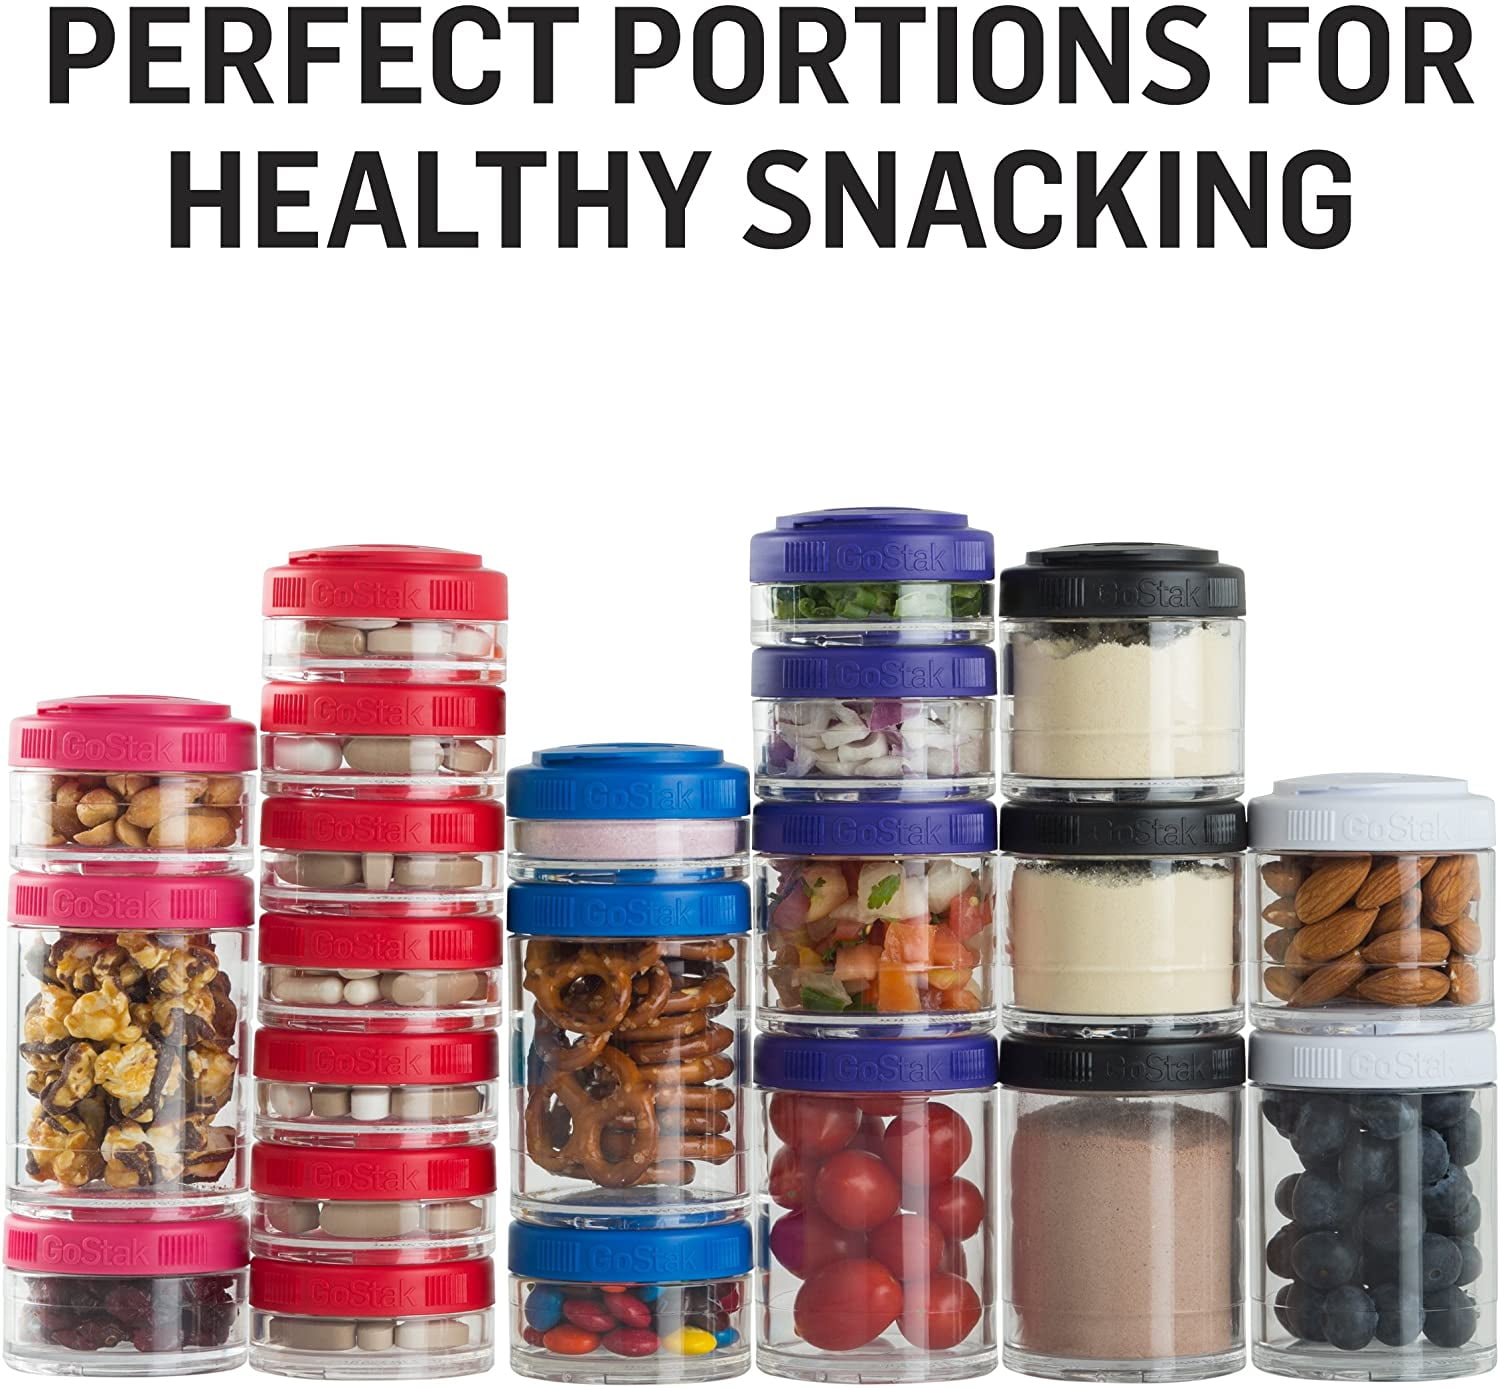 DODAMOUR Reusable Snack Tray, Platter Food Storage Container